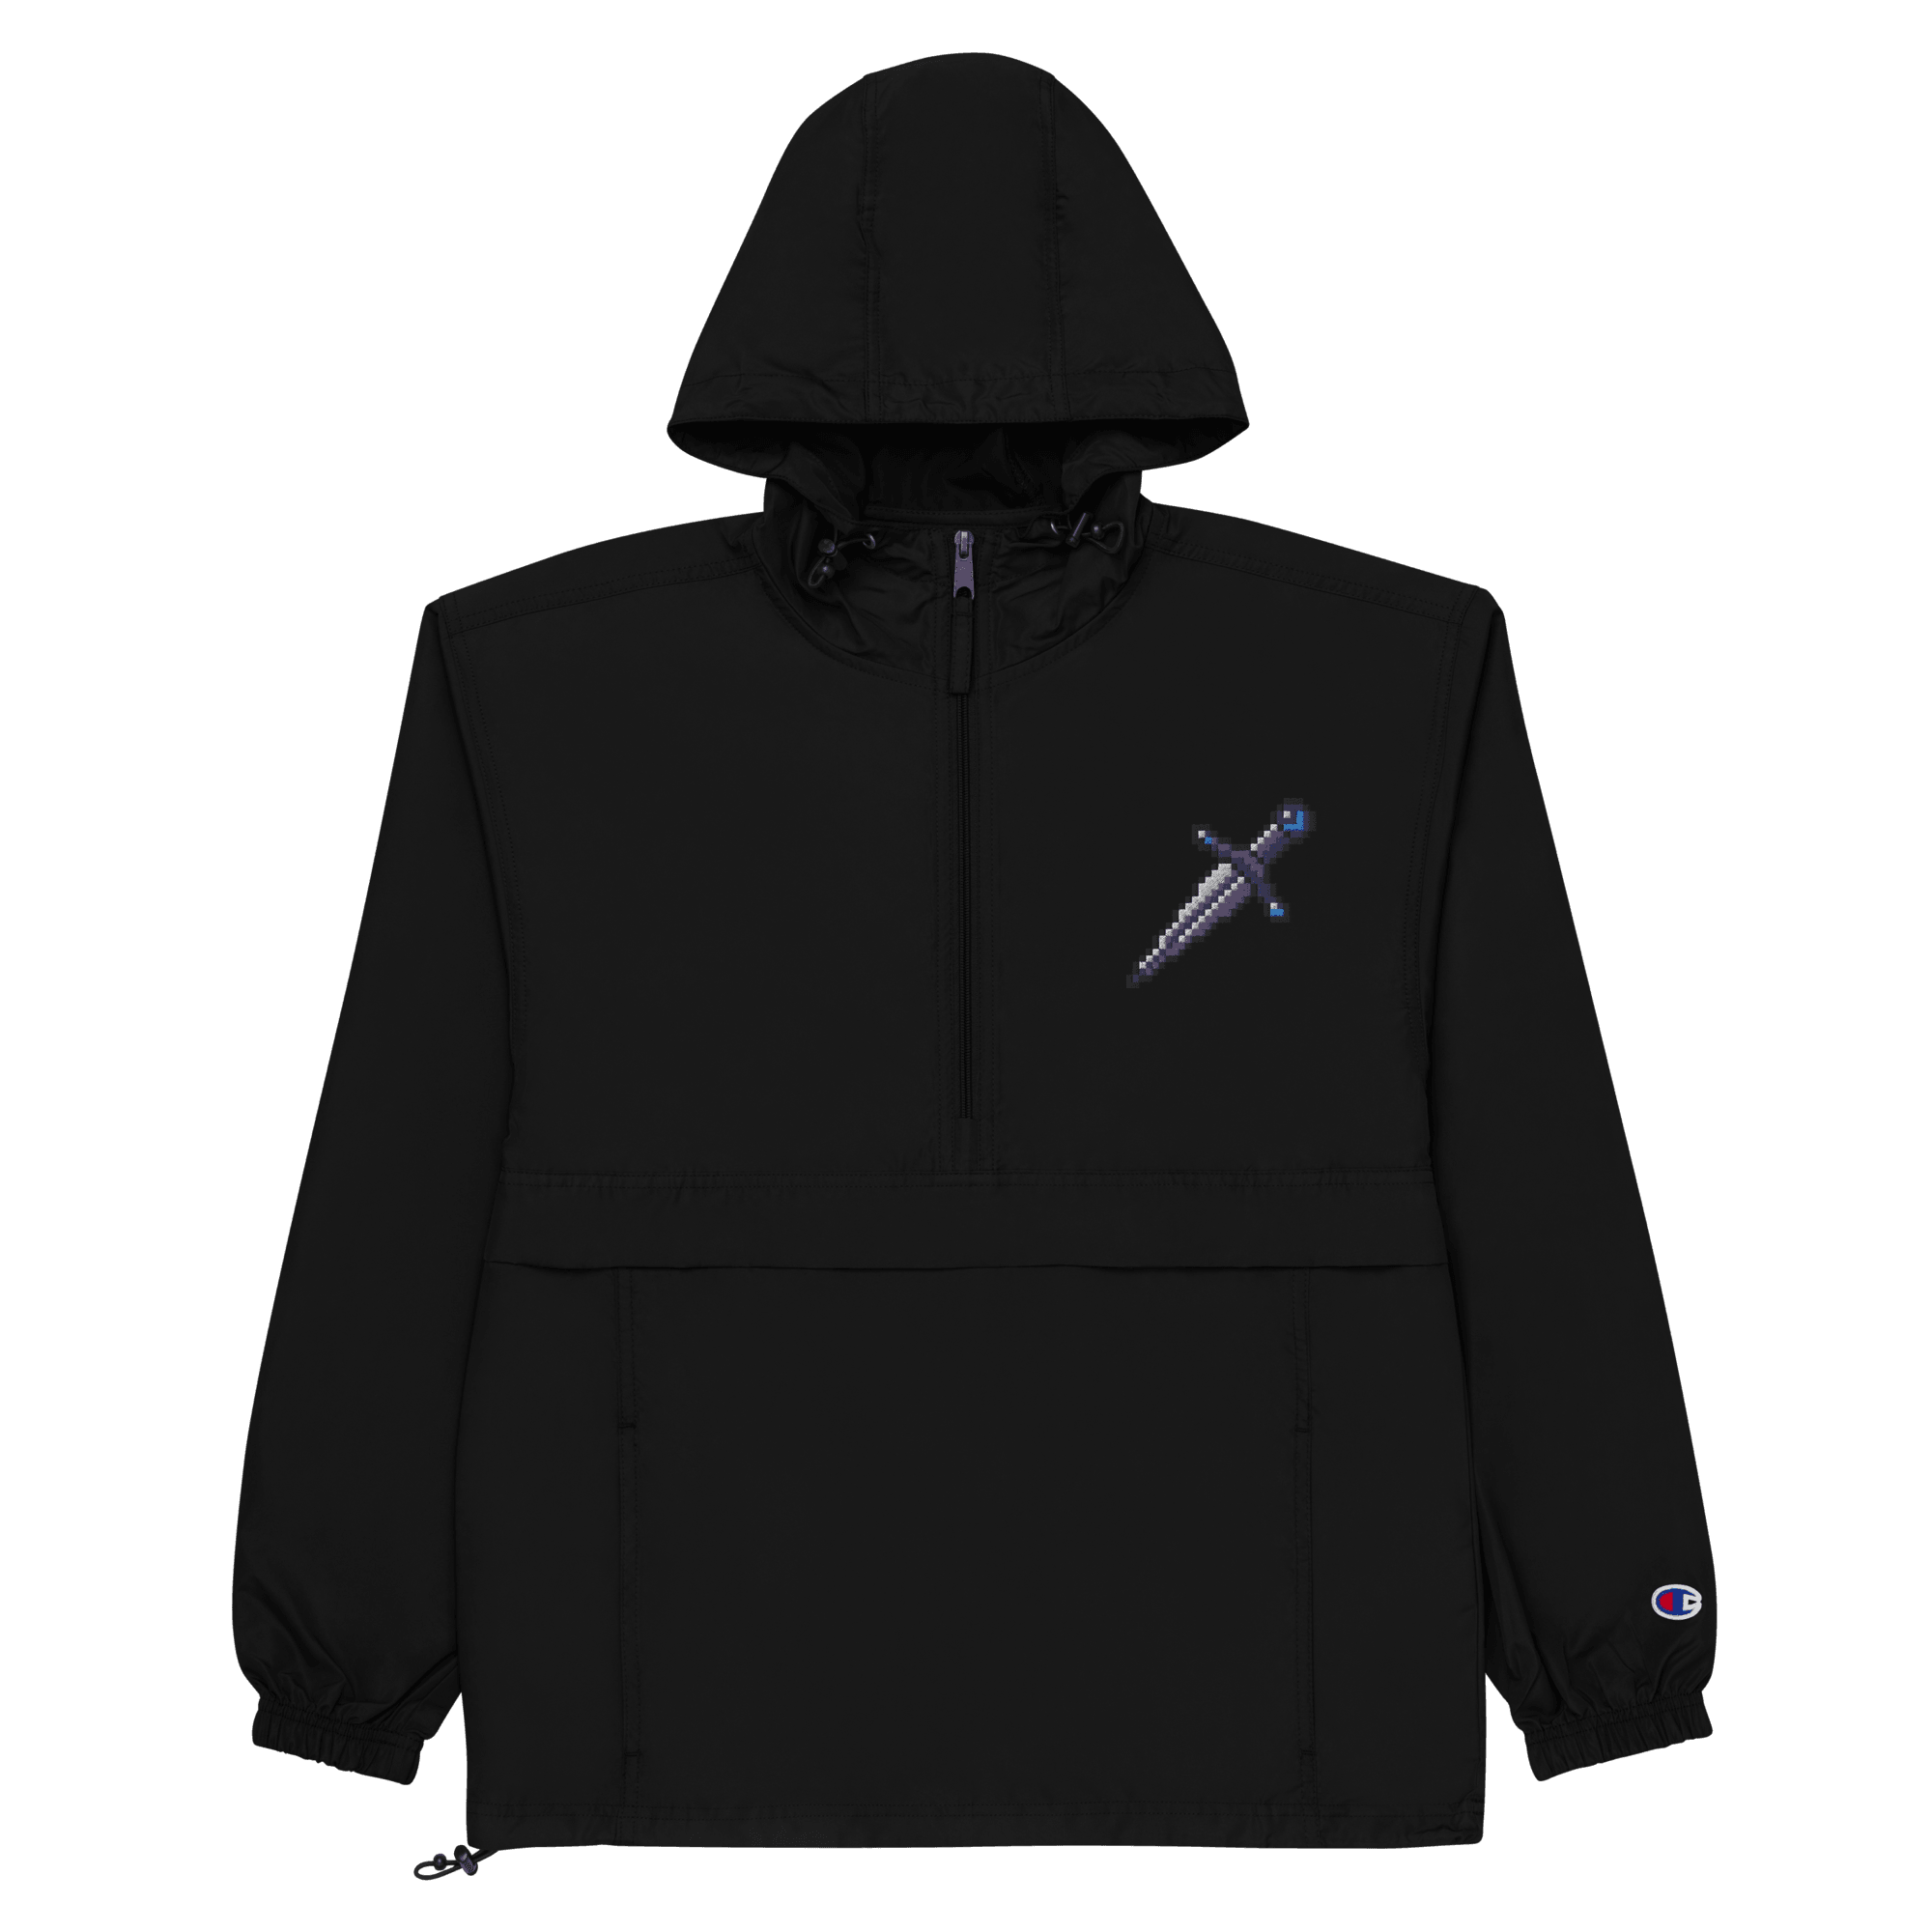 Passion® Champion Embroidered Packable Jacket - Kikillo Club